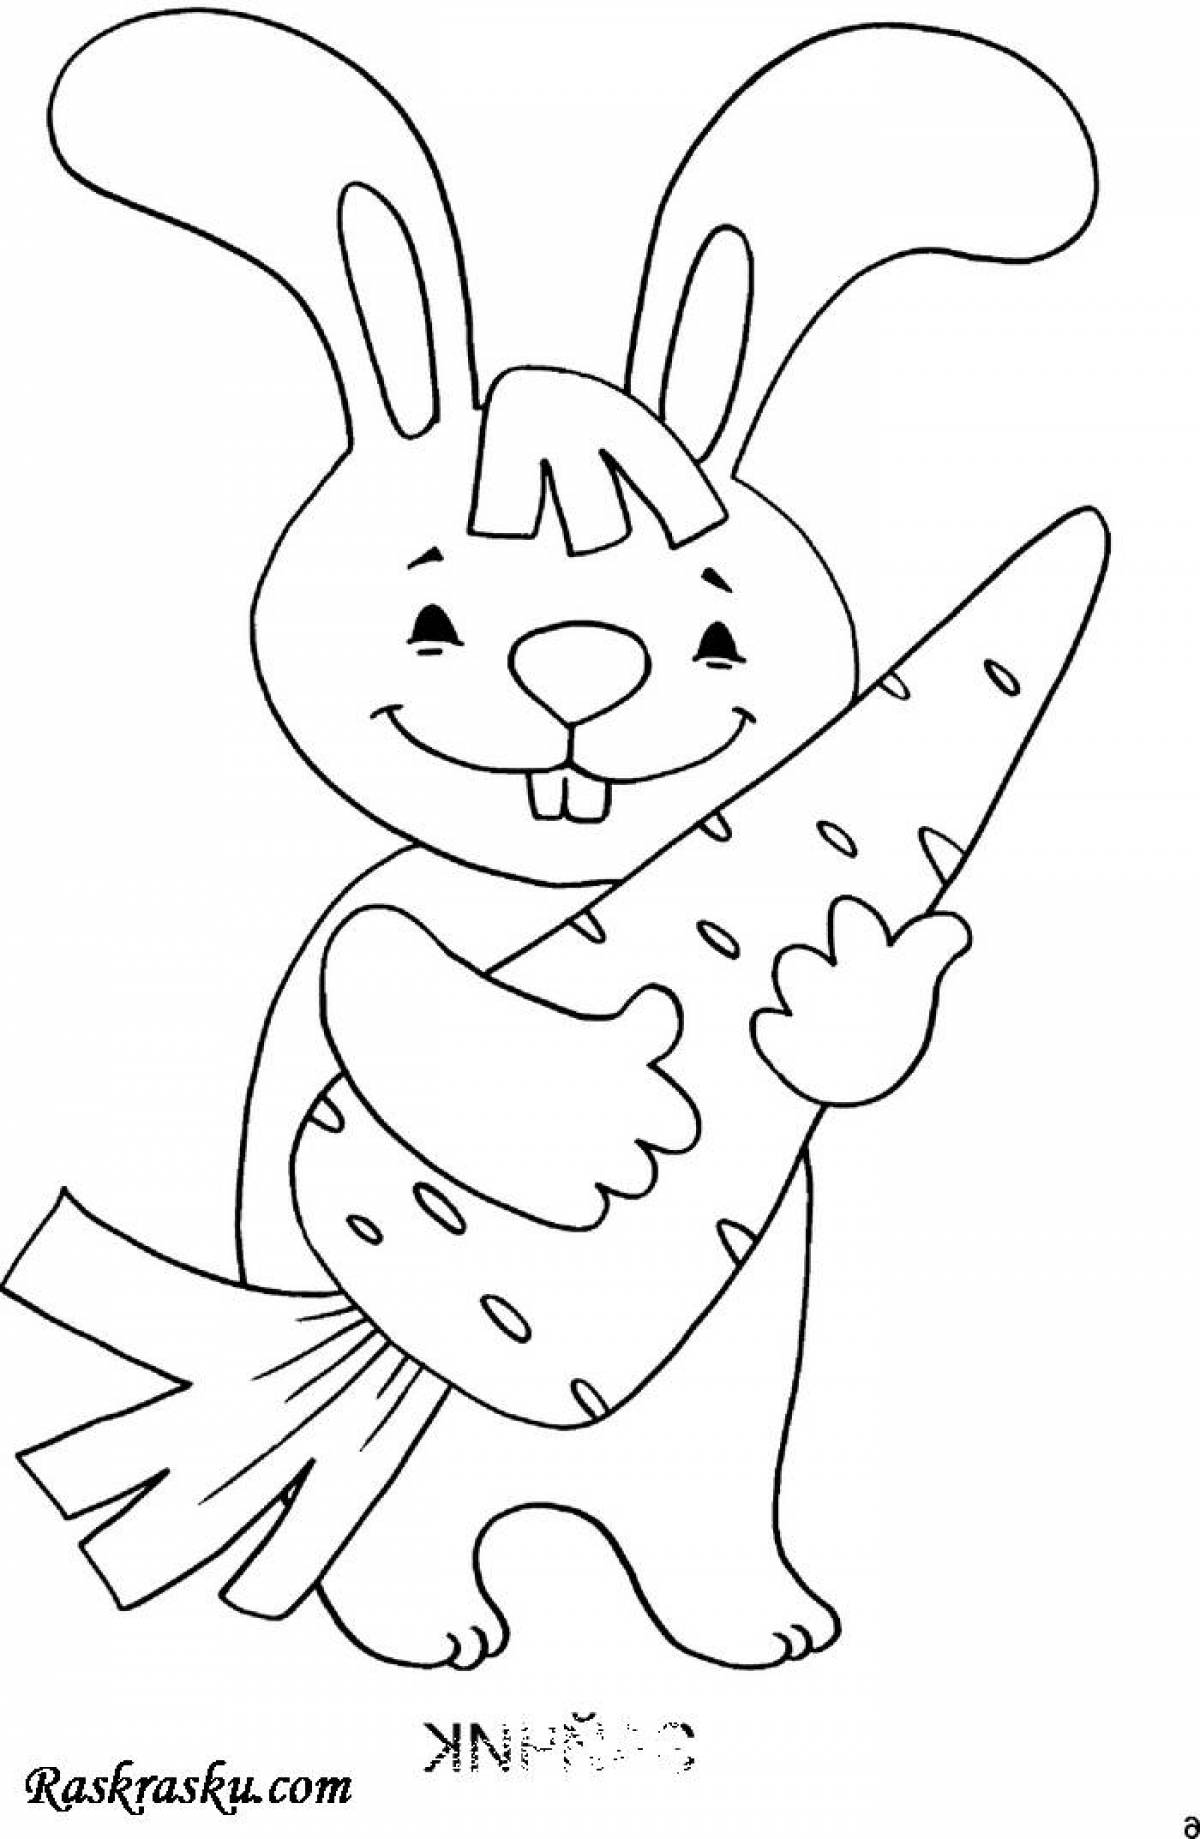 Friendly bunny coloring book for kids